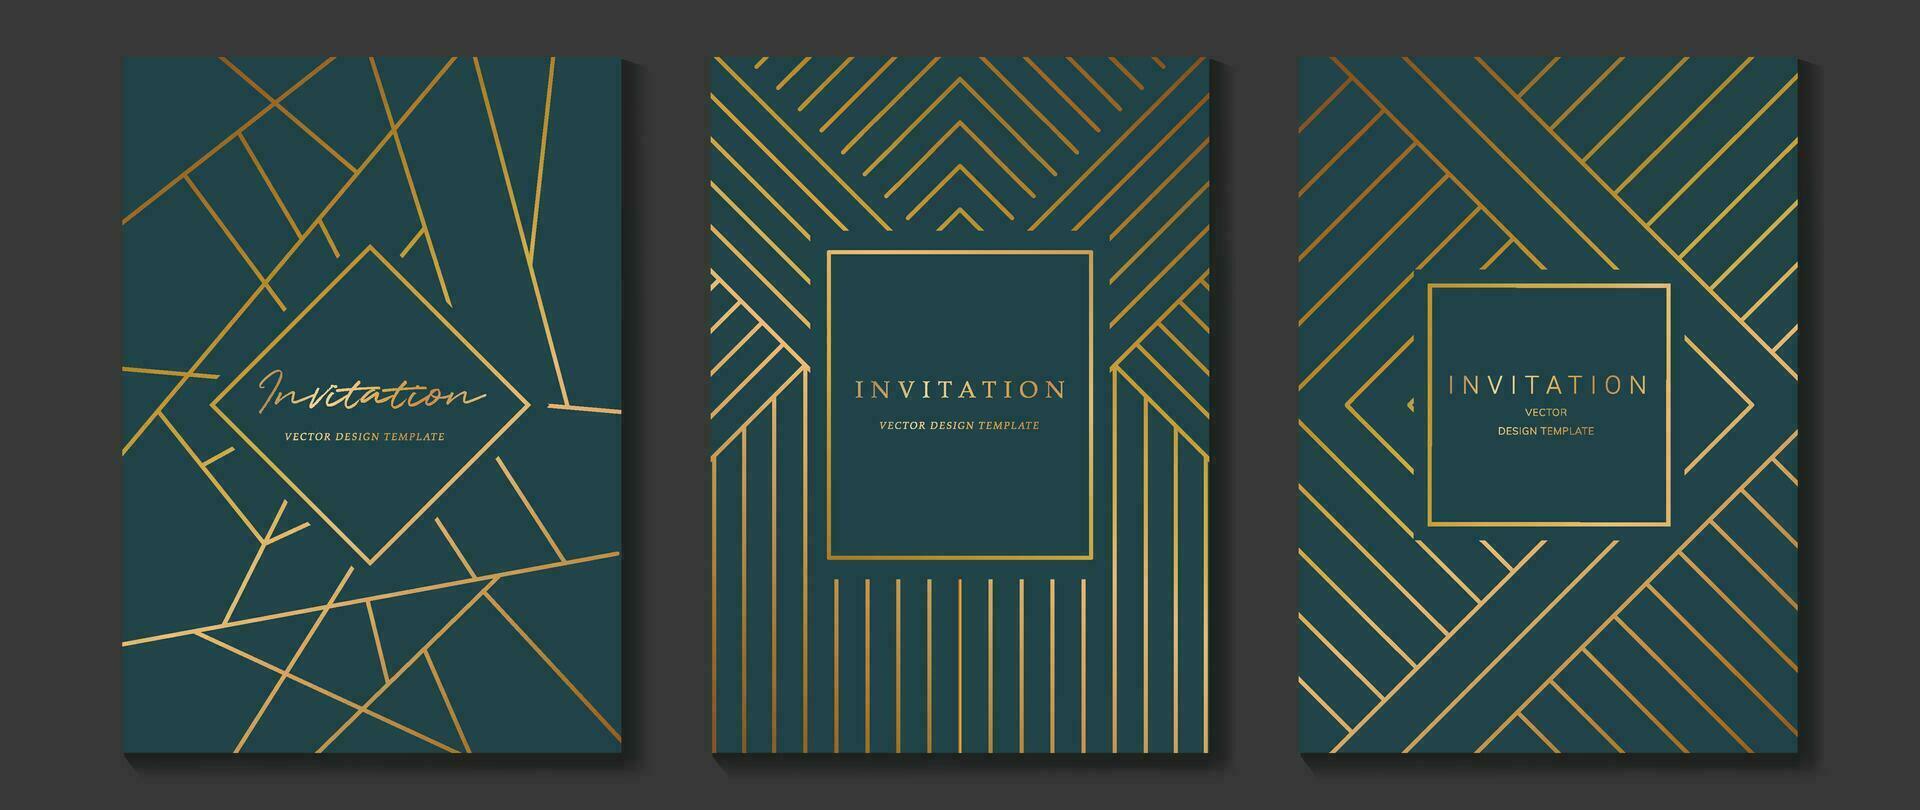 Luxury invitation card background vector. Golden elegant geometric shape, gold lines on green background. Premium design illustration for wedding and vip cover template, banner, poster, gala, wedding. vector